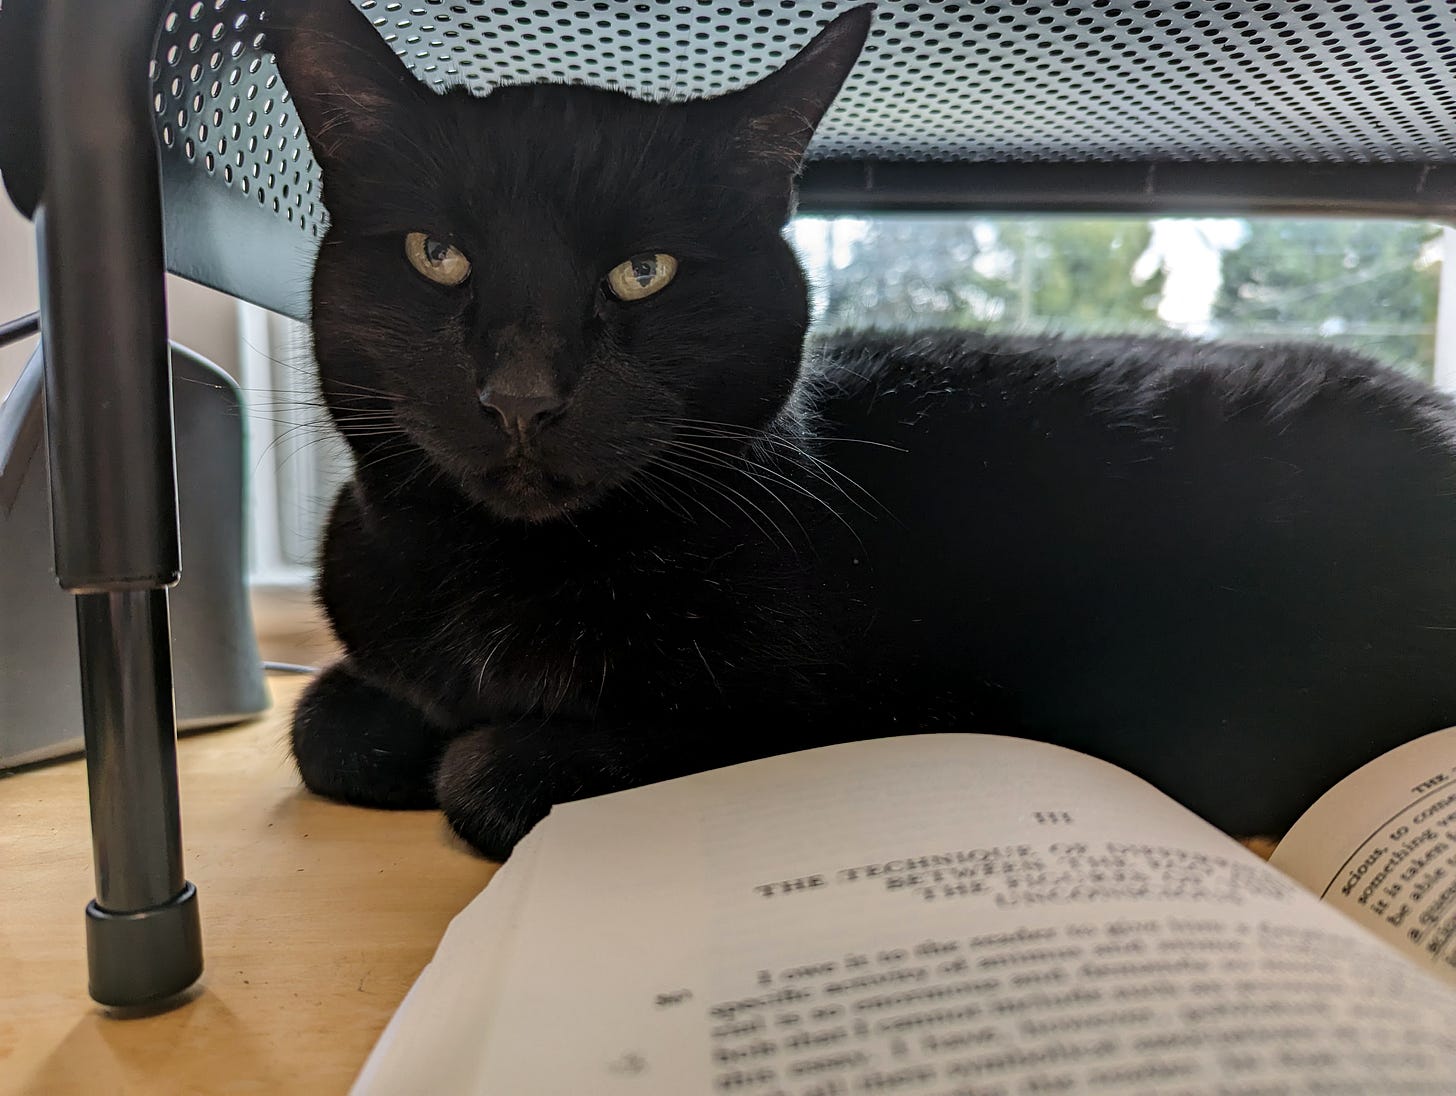 A black cat lies on a light wood desk under a perforated monitor riser, head raised, paws tucked under. He looks out to the left of the frame.In the foreground is an unreadable book, open.